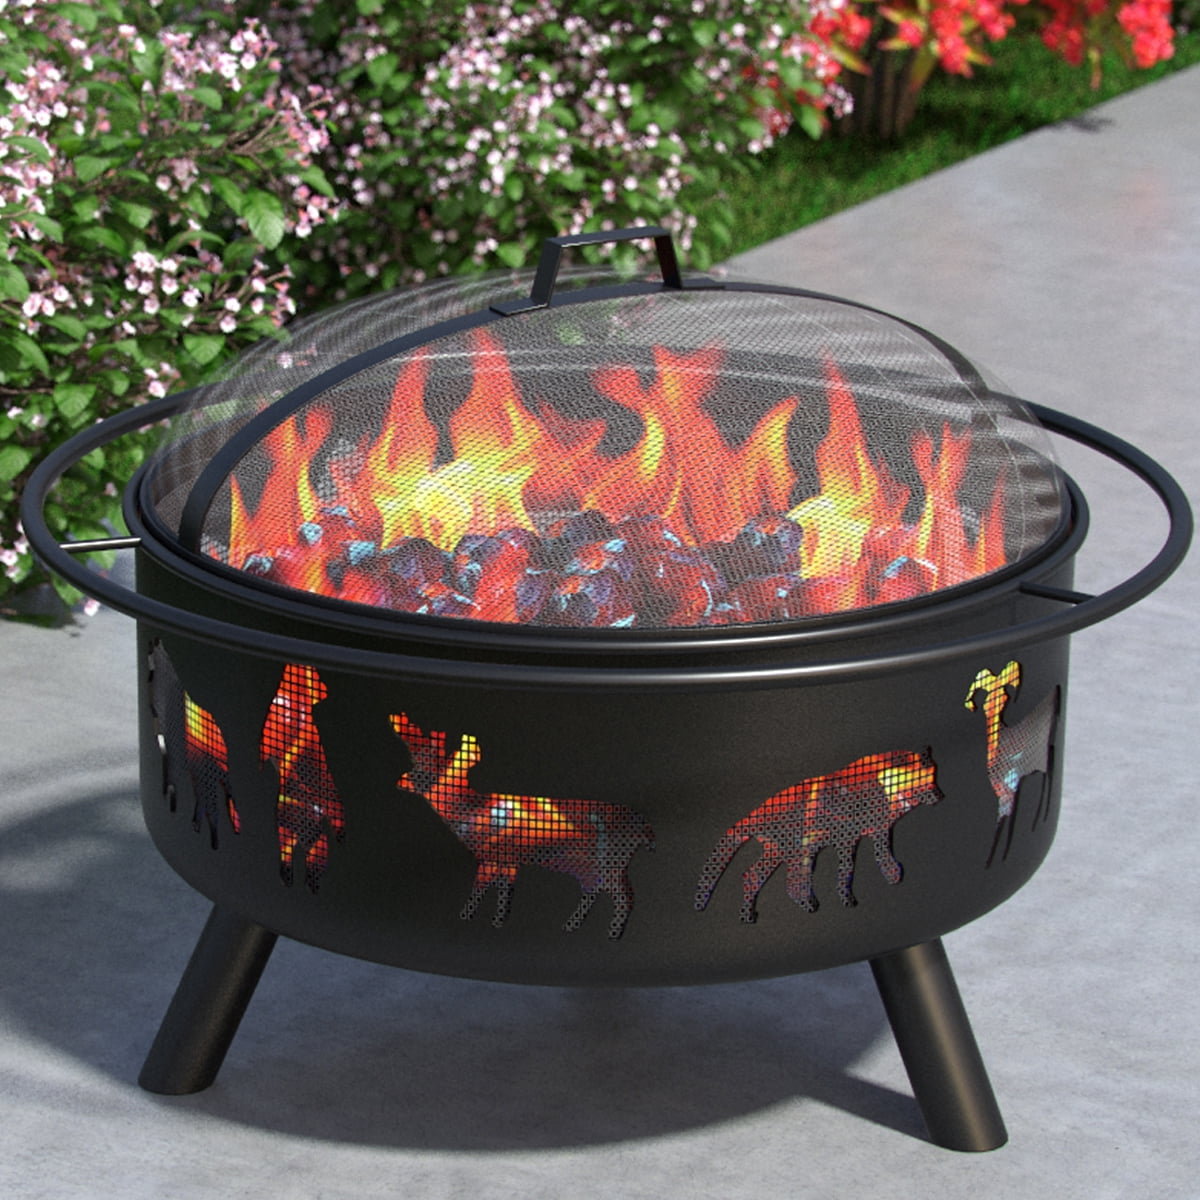 Regal Flame Wild Life 23 Portable Outdoor Fireplace Fire Pit Ring for Backyard Patio Fire, RV, Patio Heater, Stove, Camping, Bo